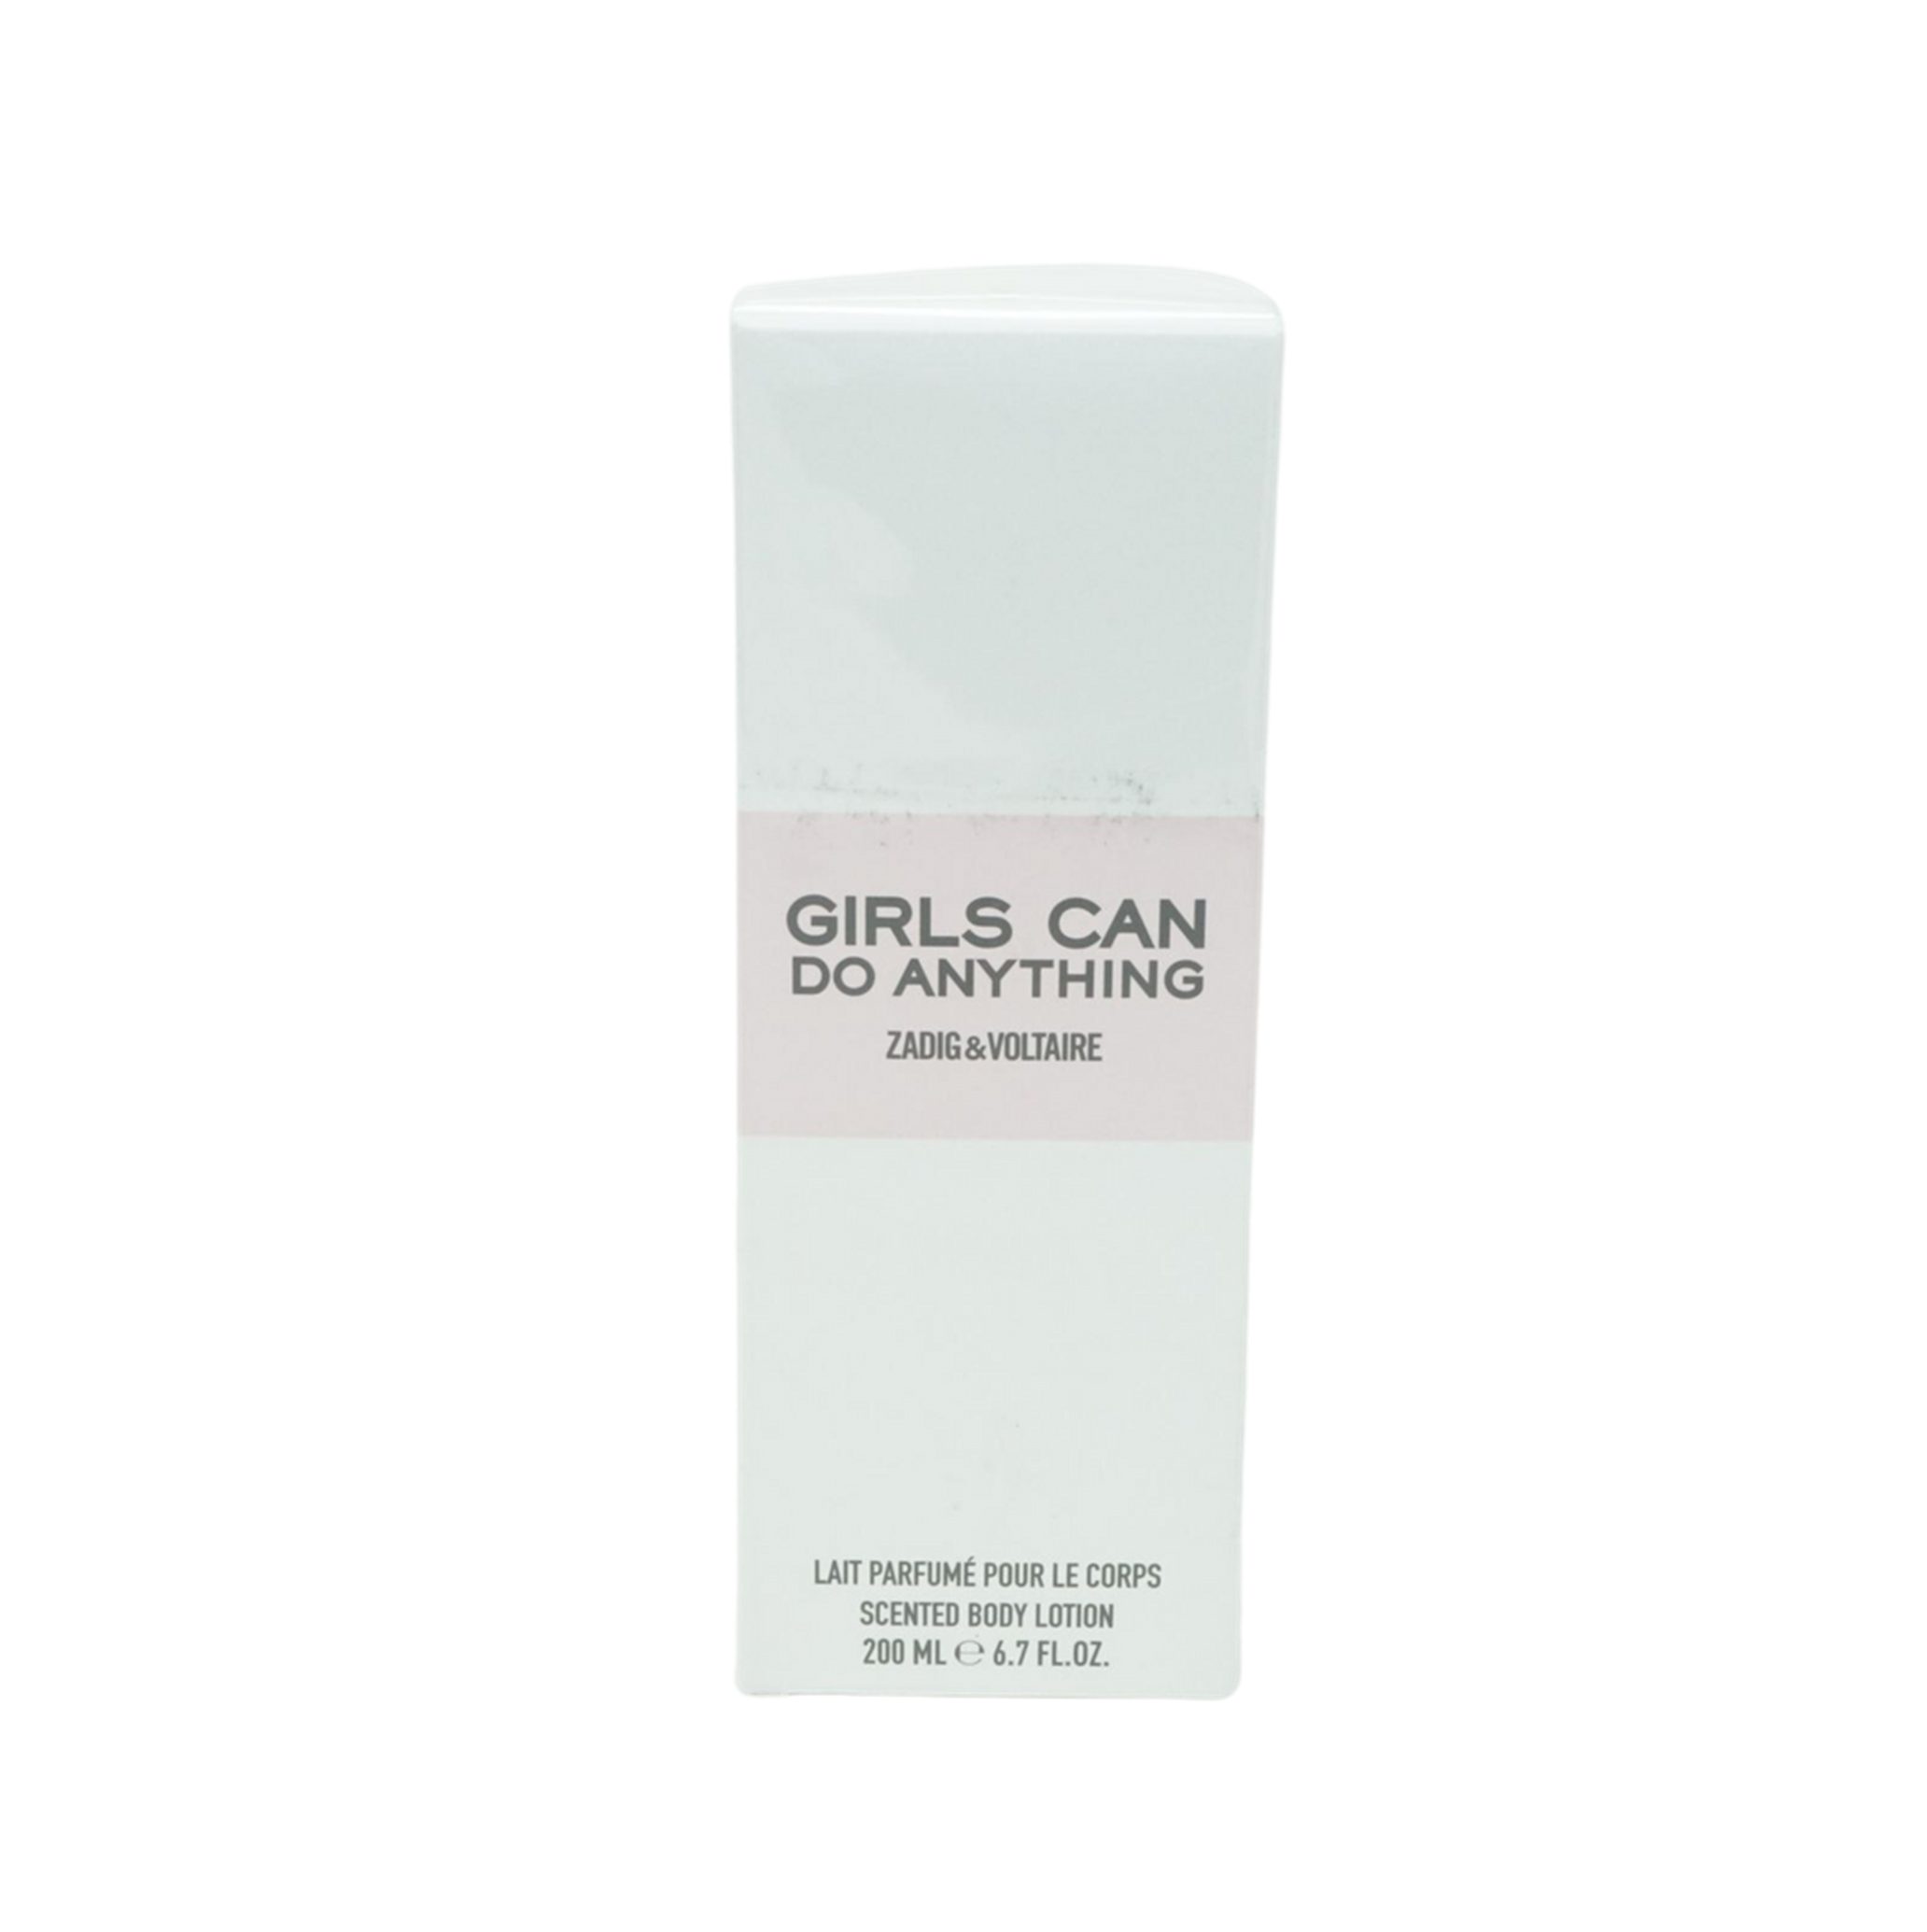 ZADIG & VOLTAIRE Bodylotion Zadig & Voltaire Girls can do Anything Body Lotion 200ml